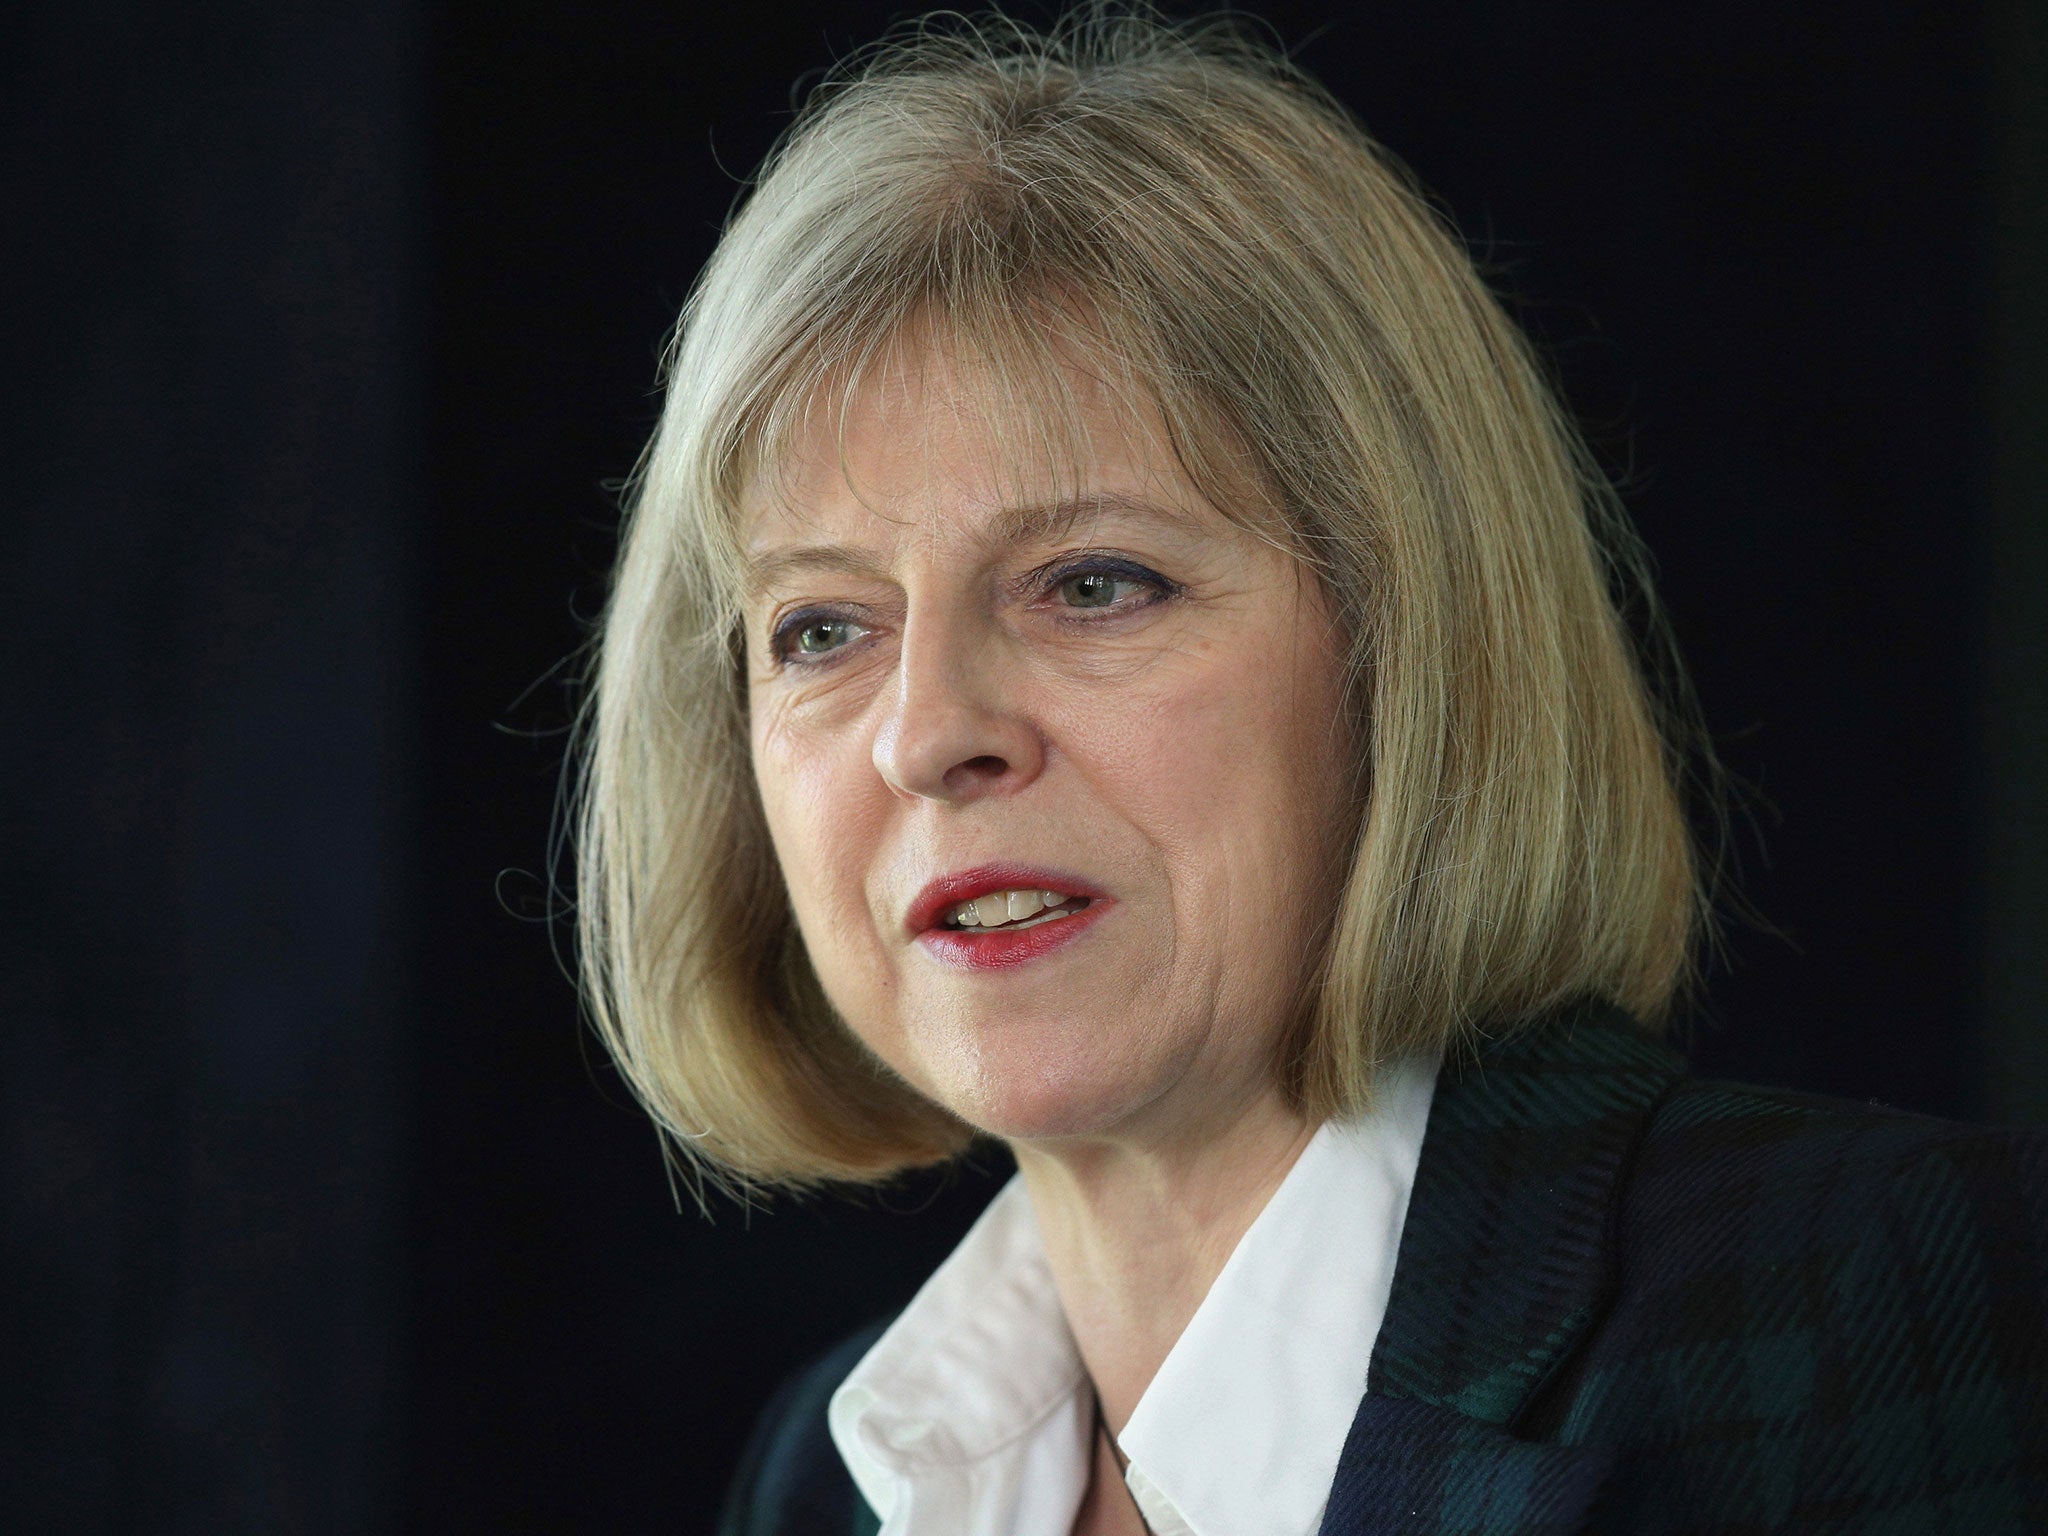 Home Secretary Theresa May said the investigation ‘confirmed her concern’